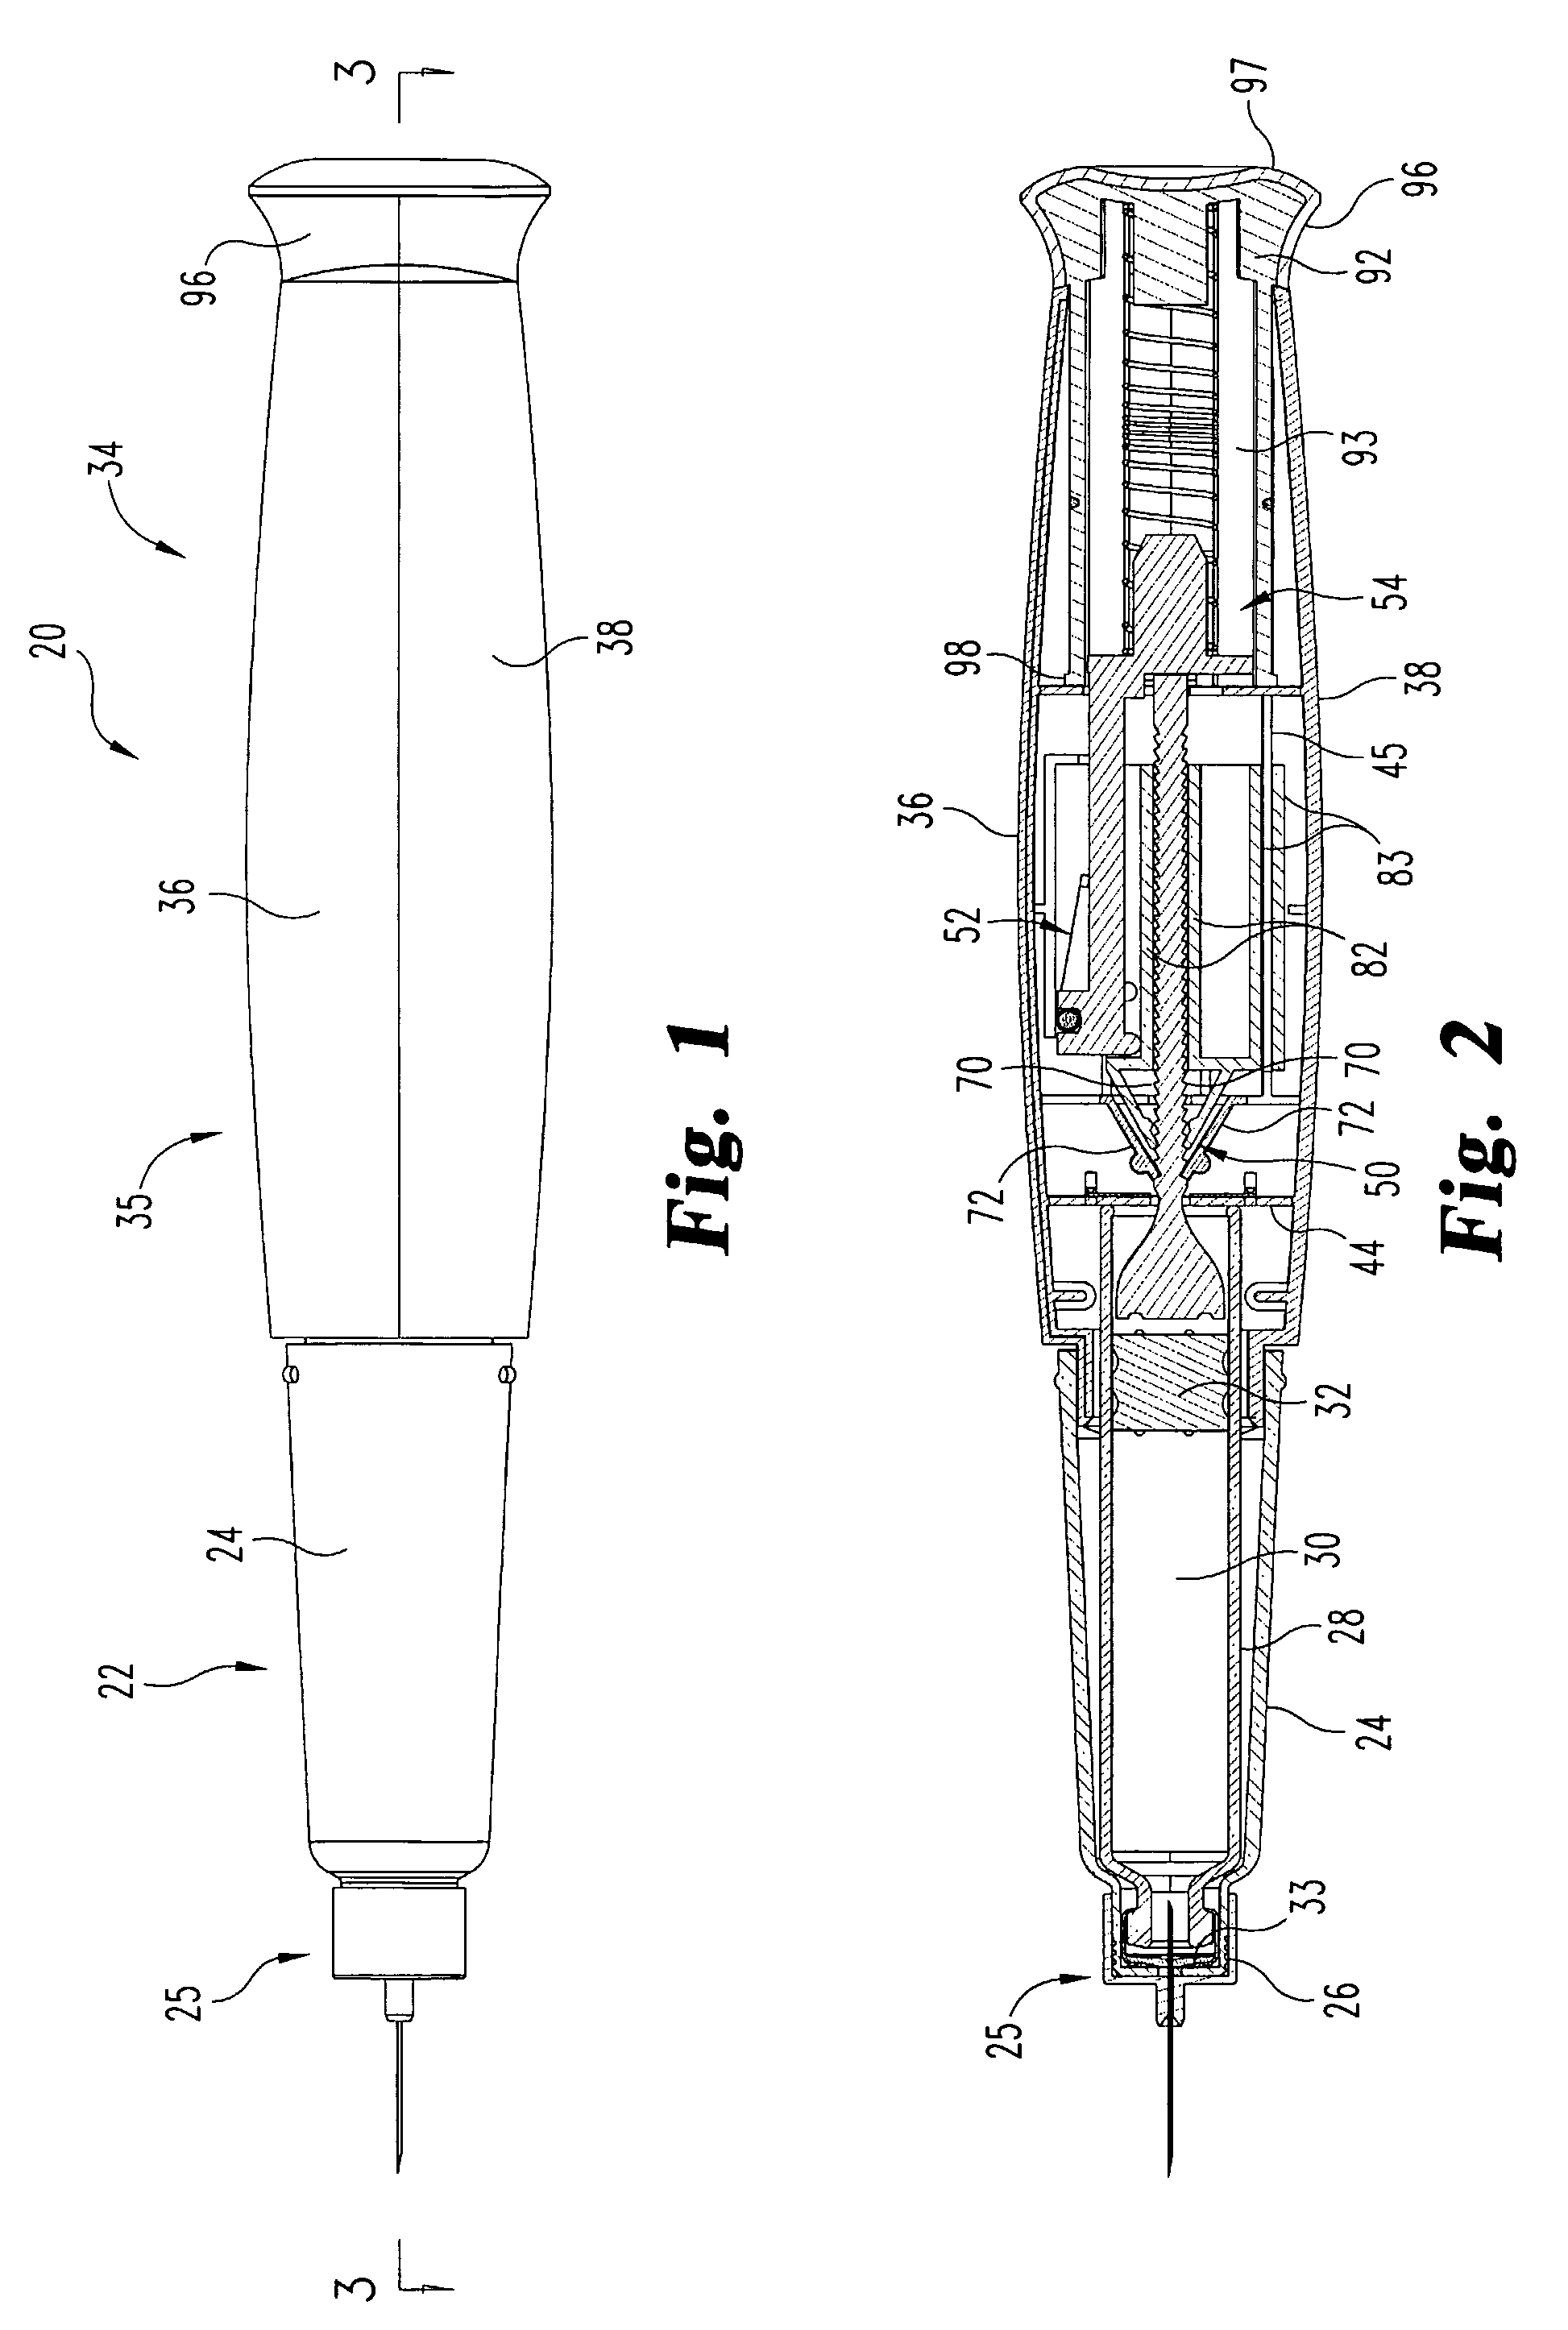 Medication dispensing apparatus with spring-driven locking feature enabled by administration of final dose